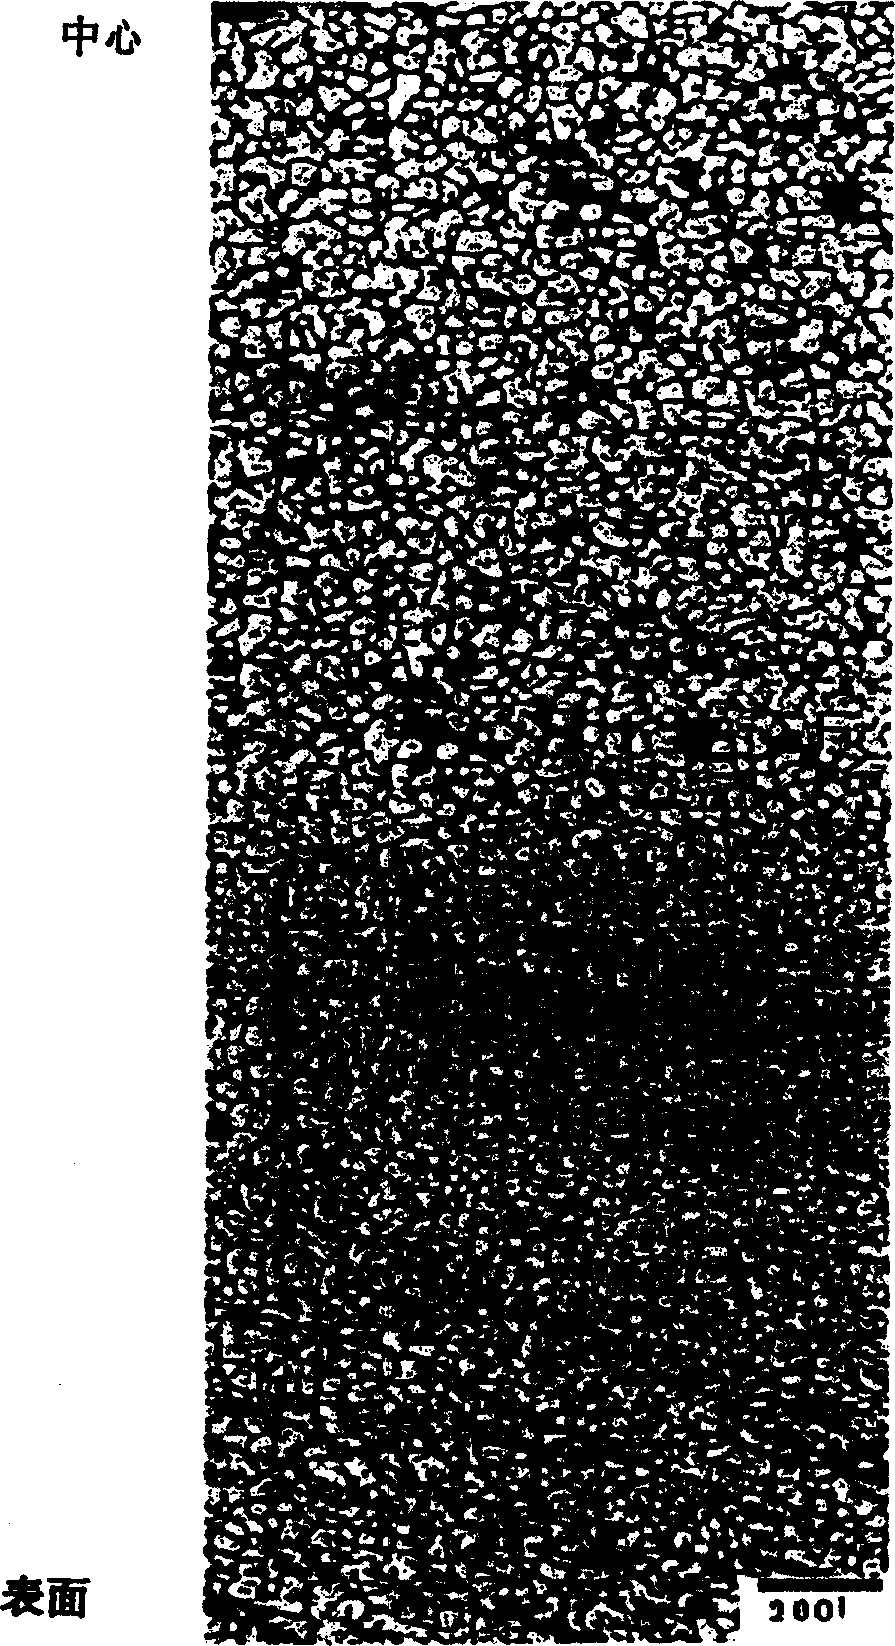 Metallic materials for rheocasting or thixoforming and method for manufacturing the same